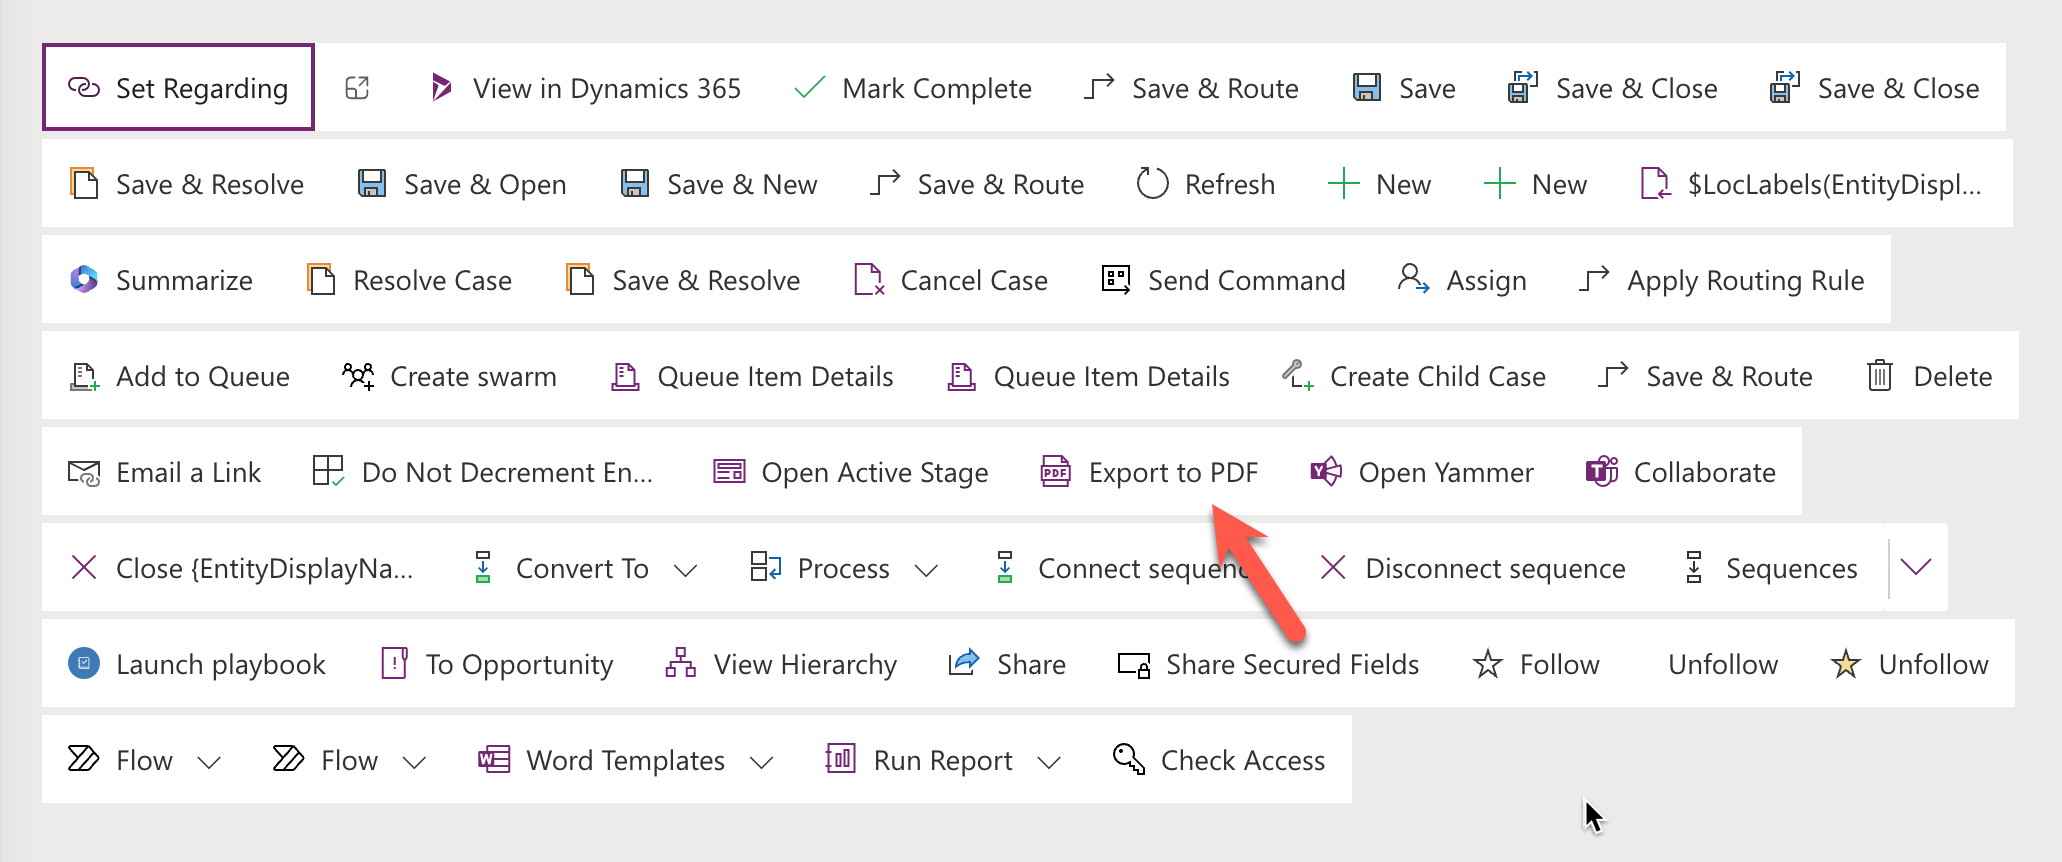 Enabling Export to PDF Command on Case Entity in Dynamics 365